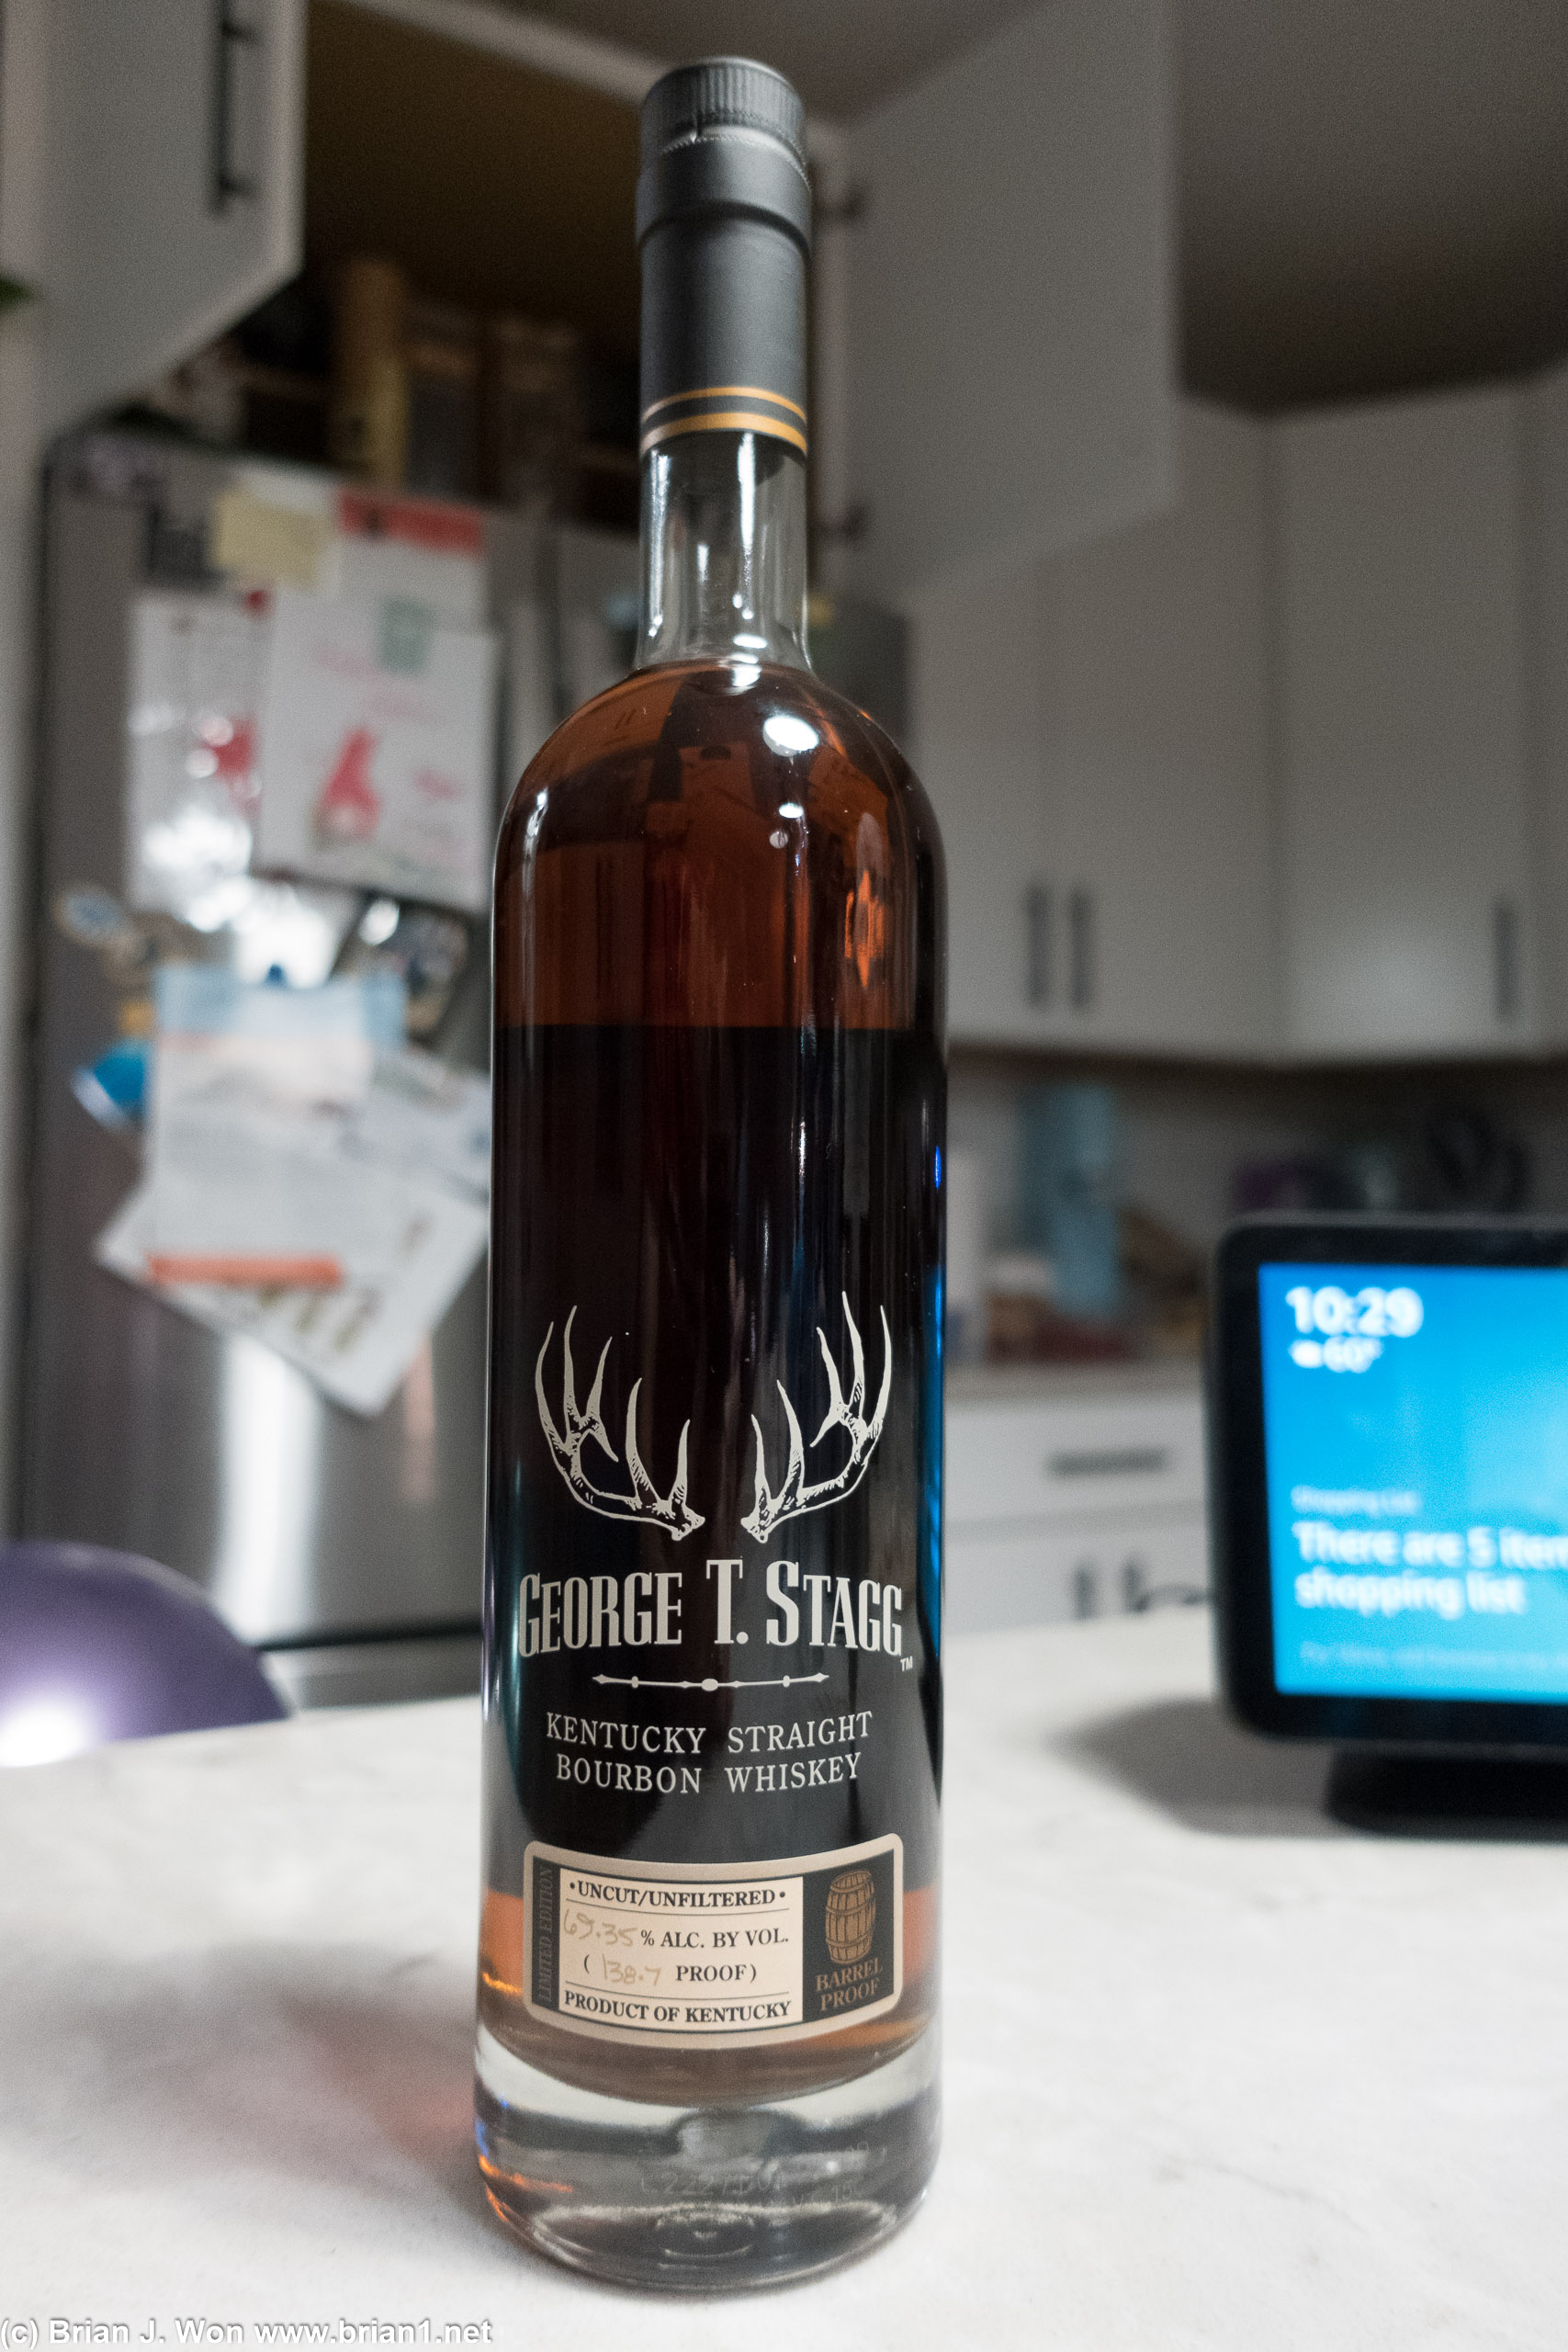 George T. Stagg was intense, needed a little water to bring it out. Hints of vanilla, cherry, maybe caramel.